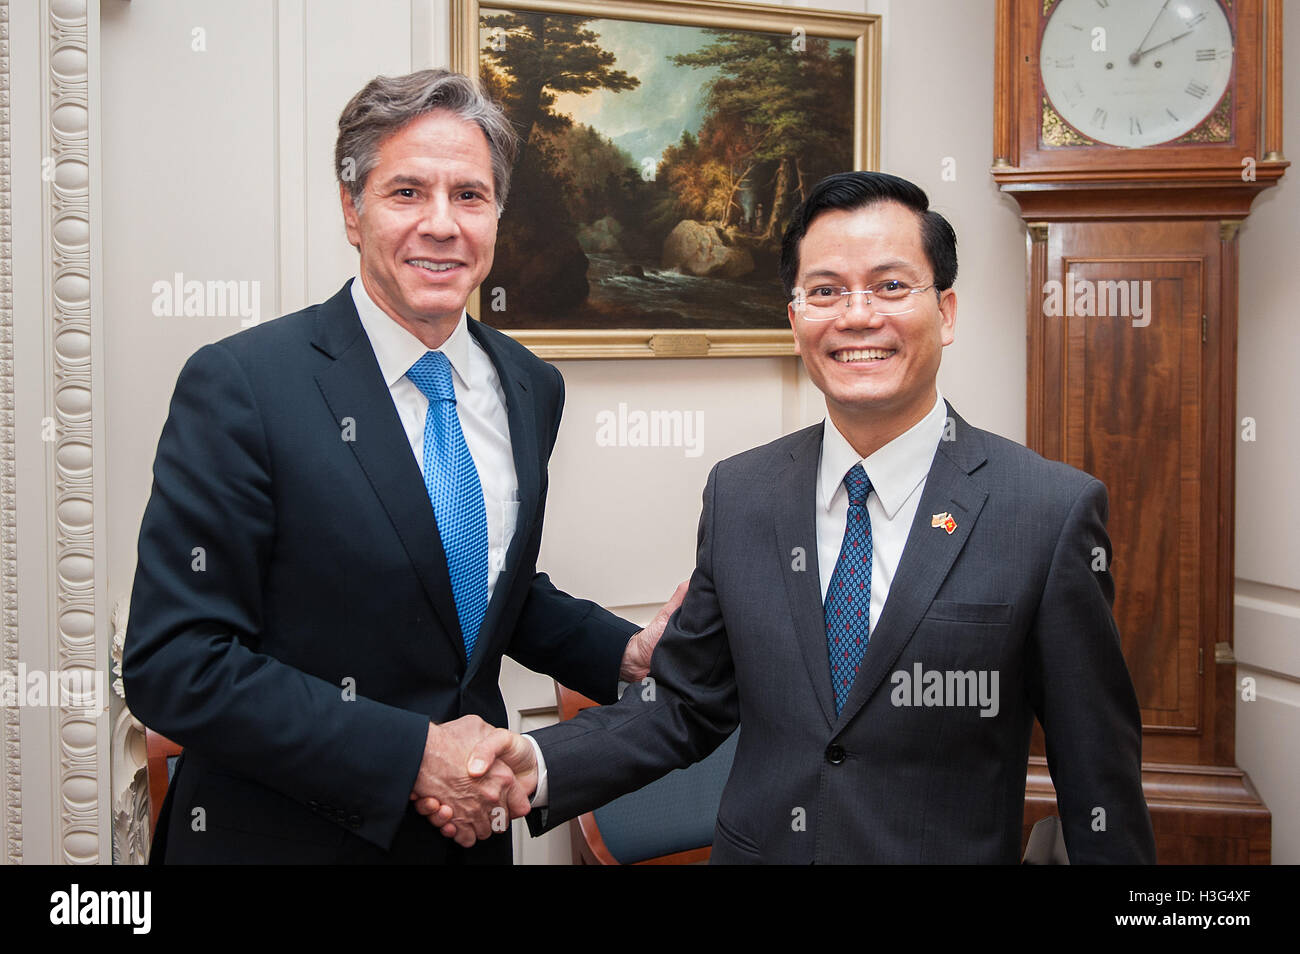 U.S. Deputy Secretary of State Antony &quot;Tony&quot; Blinken shakes hands with Vietnam Vice Foreign Minister Ha Kim Ngoc after a meeting at the U.S. Department of State in Washington, D.C. on August 1, 2016. Stock Photo